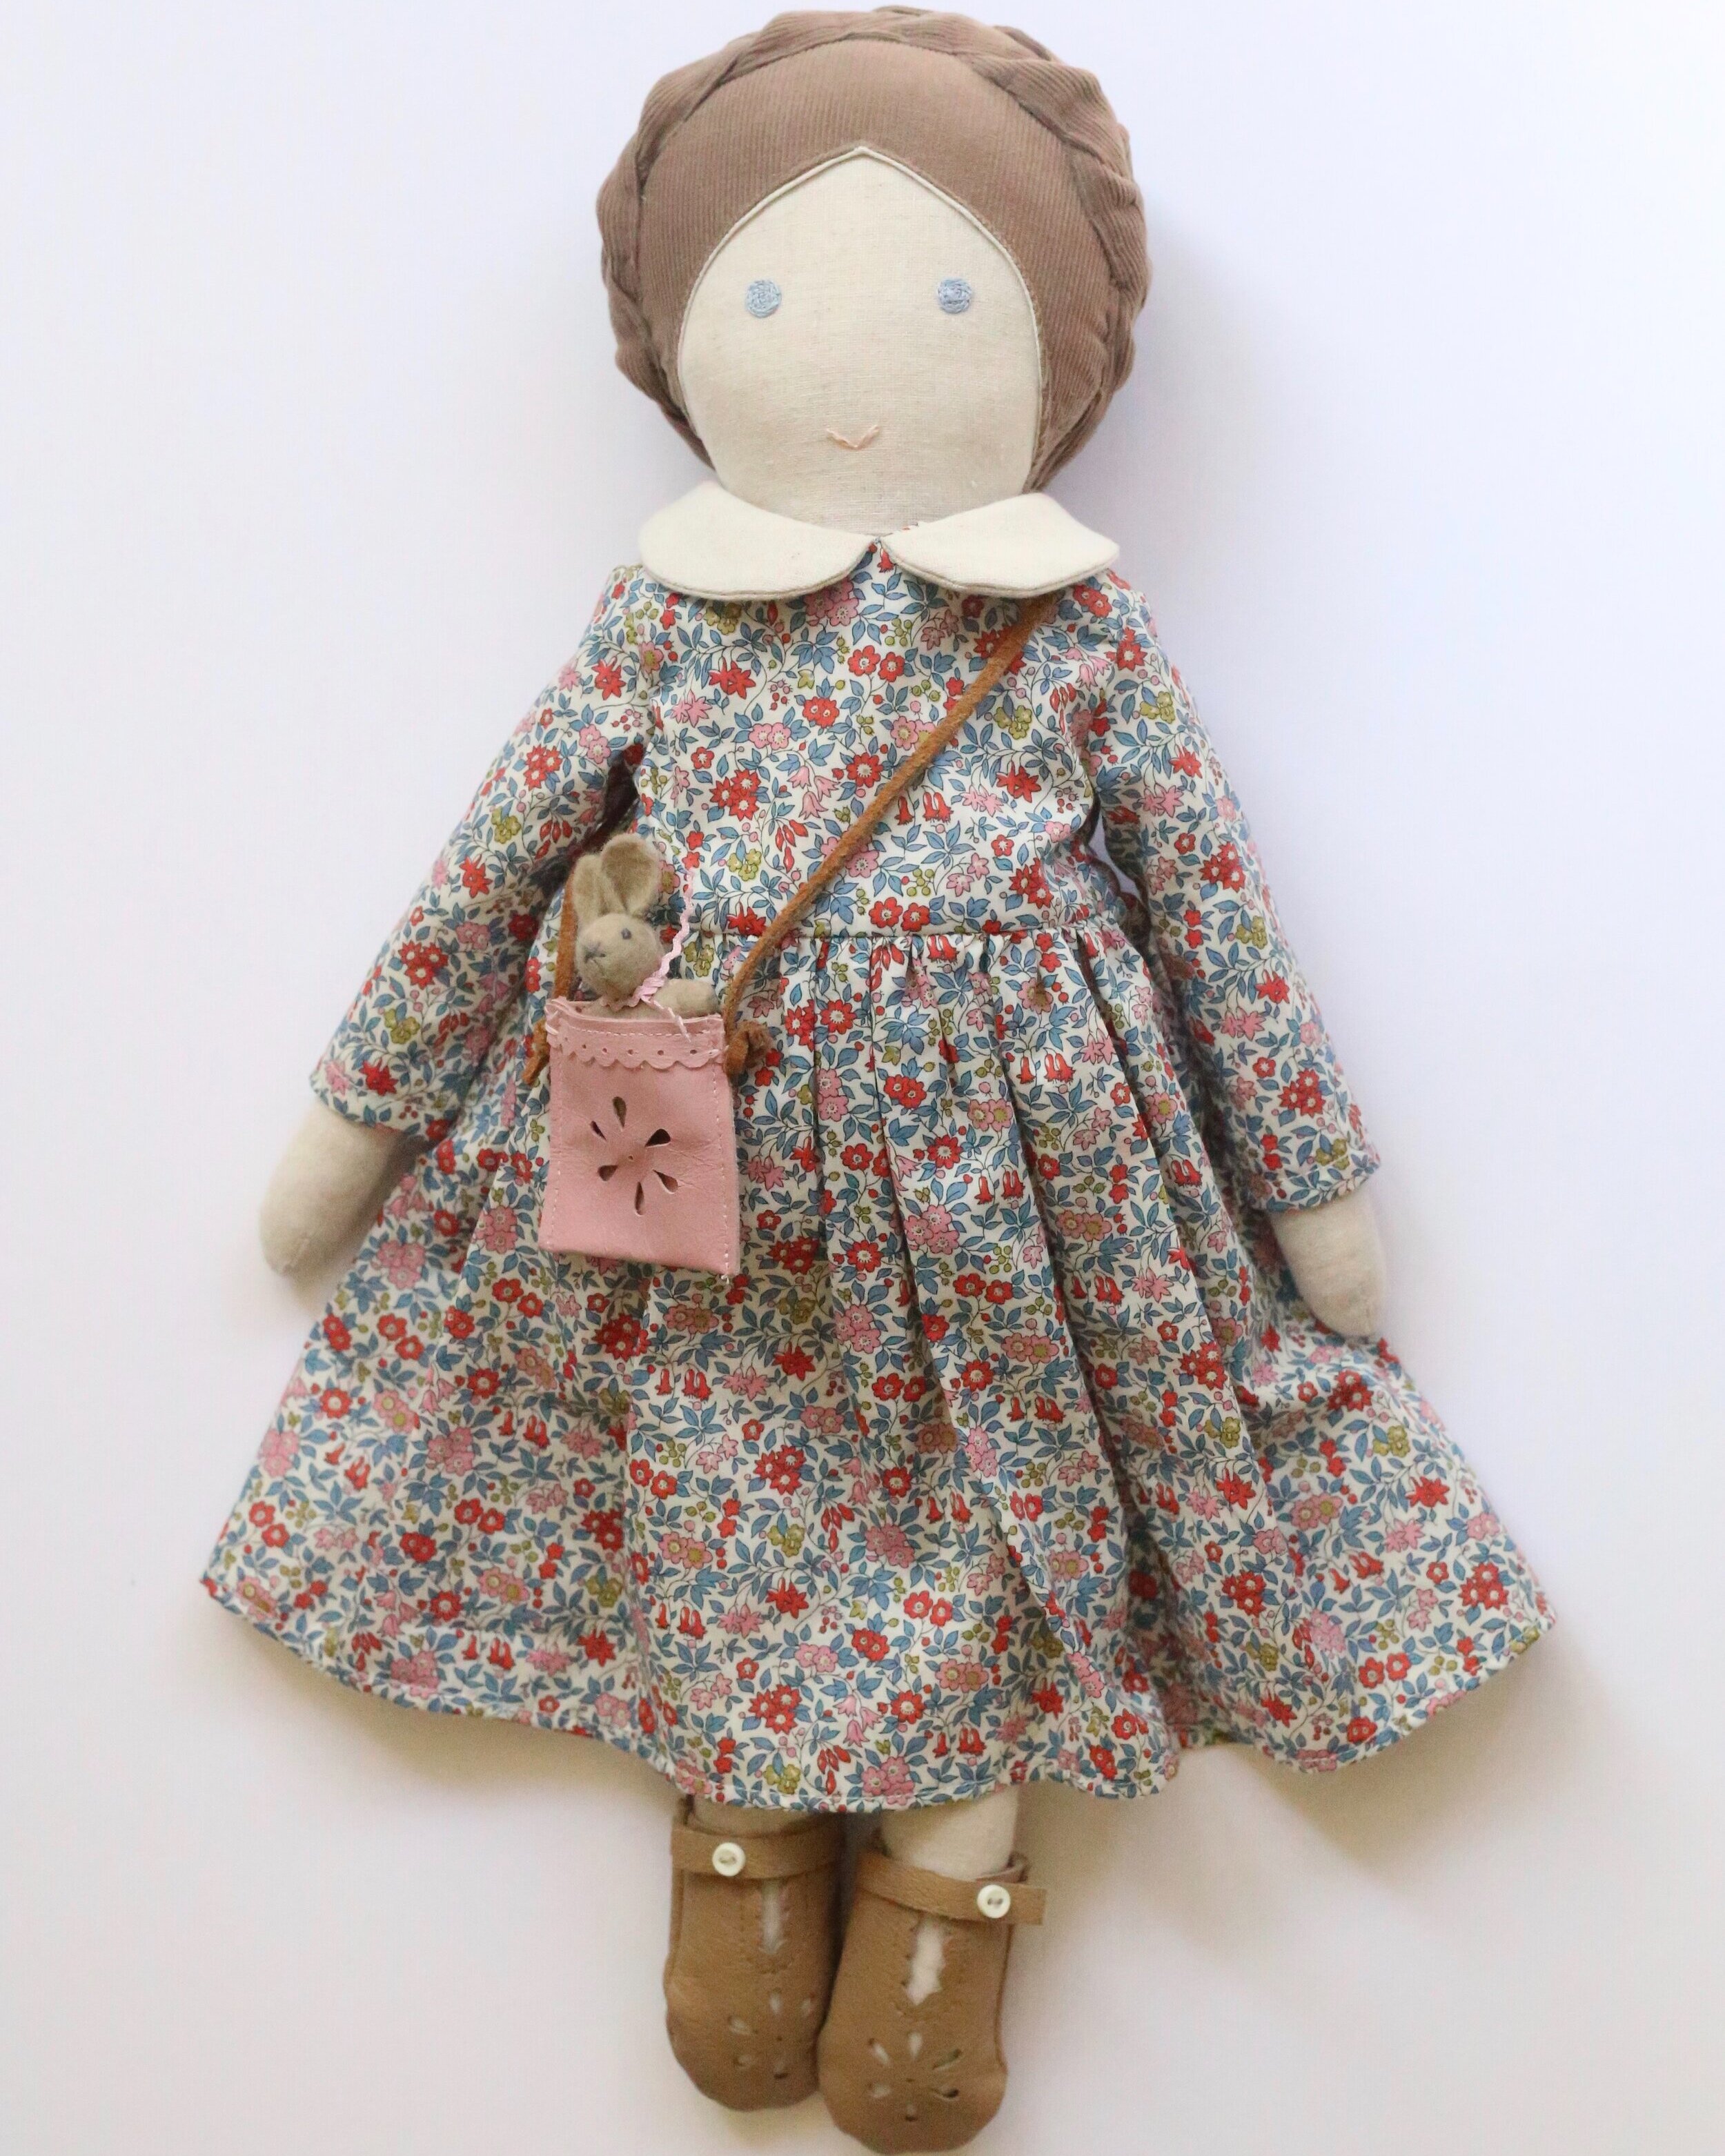 Brown+Haired+Doll.jpg